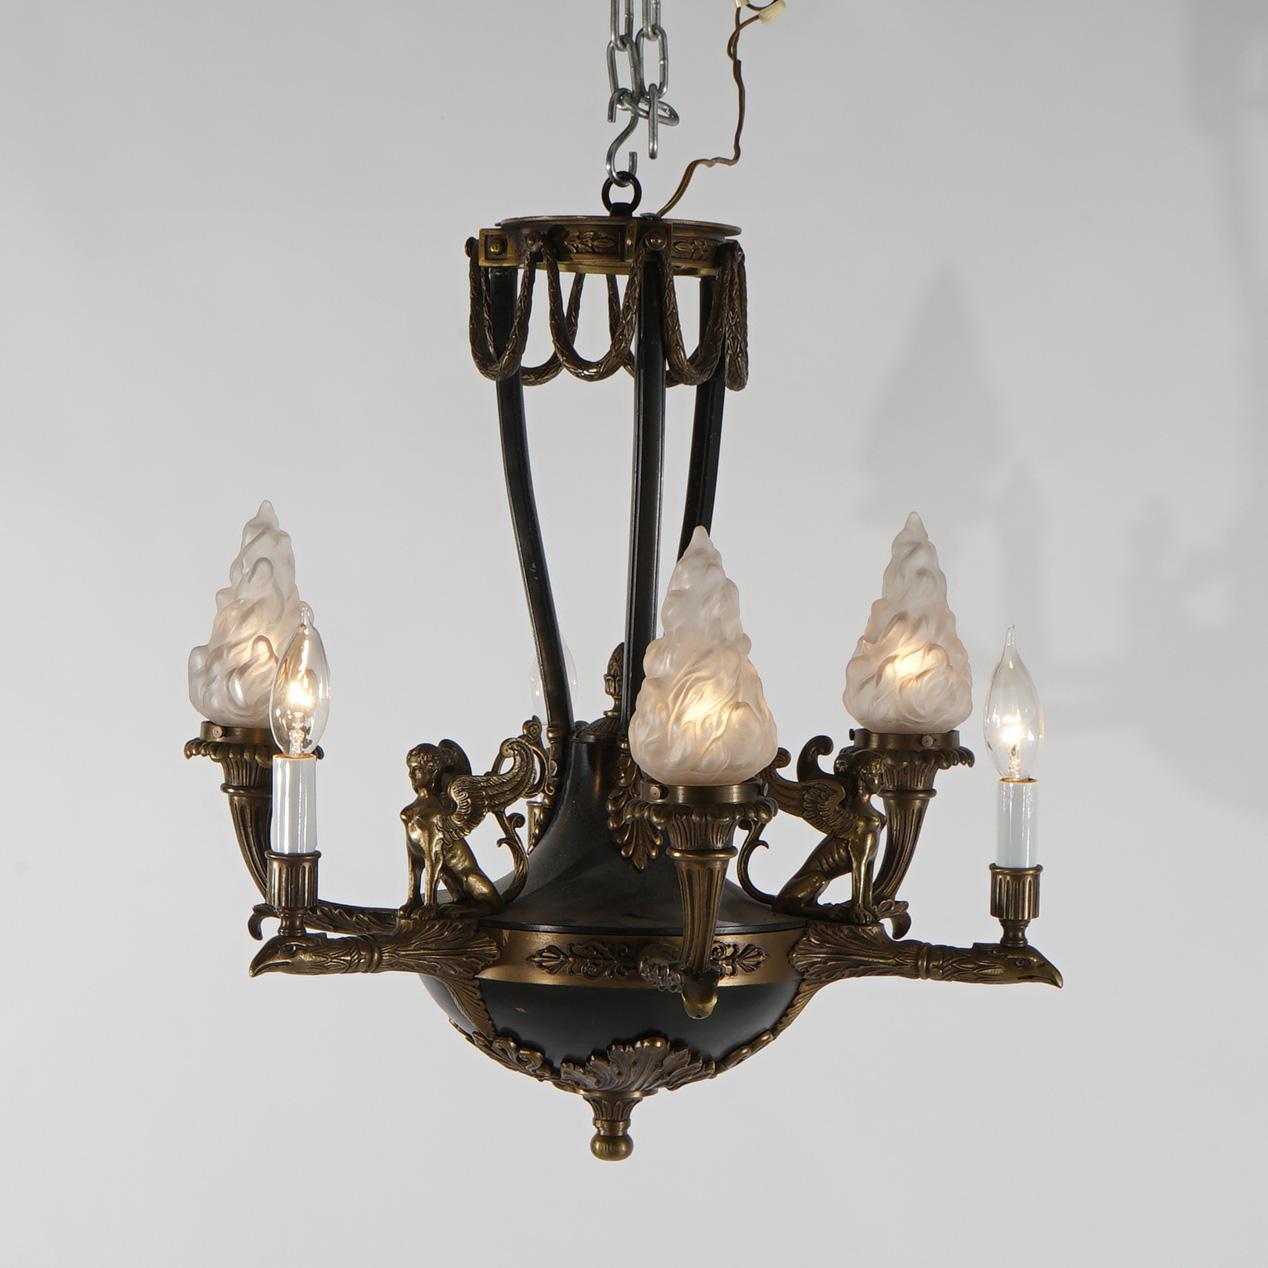 Antique French Empire chandelier with bronzed  frame, ebonized urn form font, cornucopia form lights terminating in glass flame form shades and figural sphinx elements, C1930

Measures - 20.75